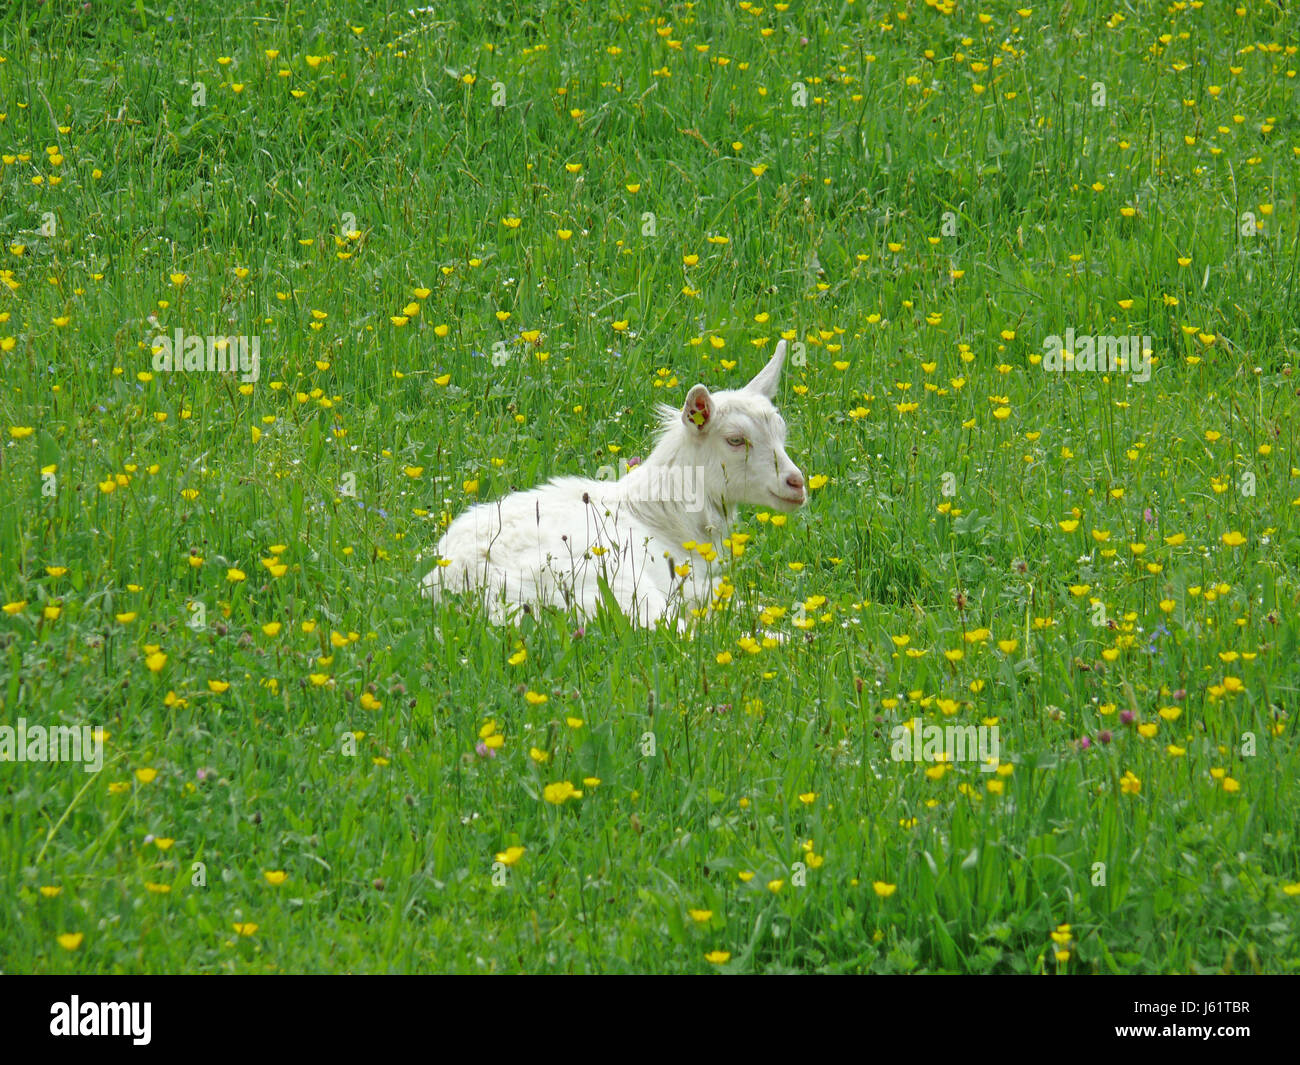 animal animals goat young animal farm animal kid puppies pet pets meadow willow Stock Photo